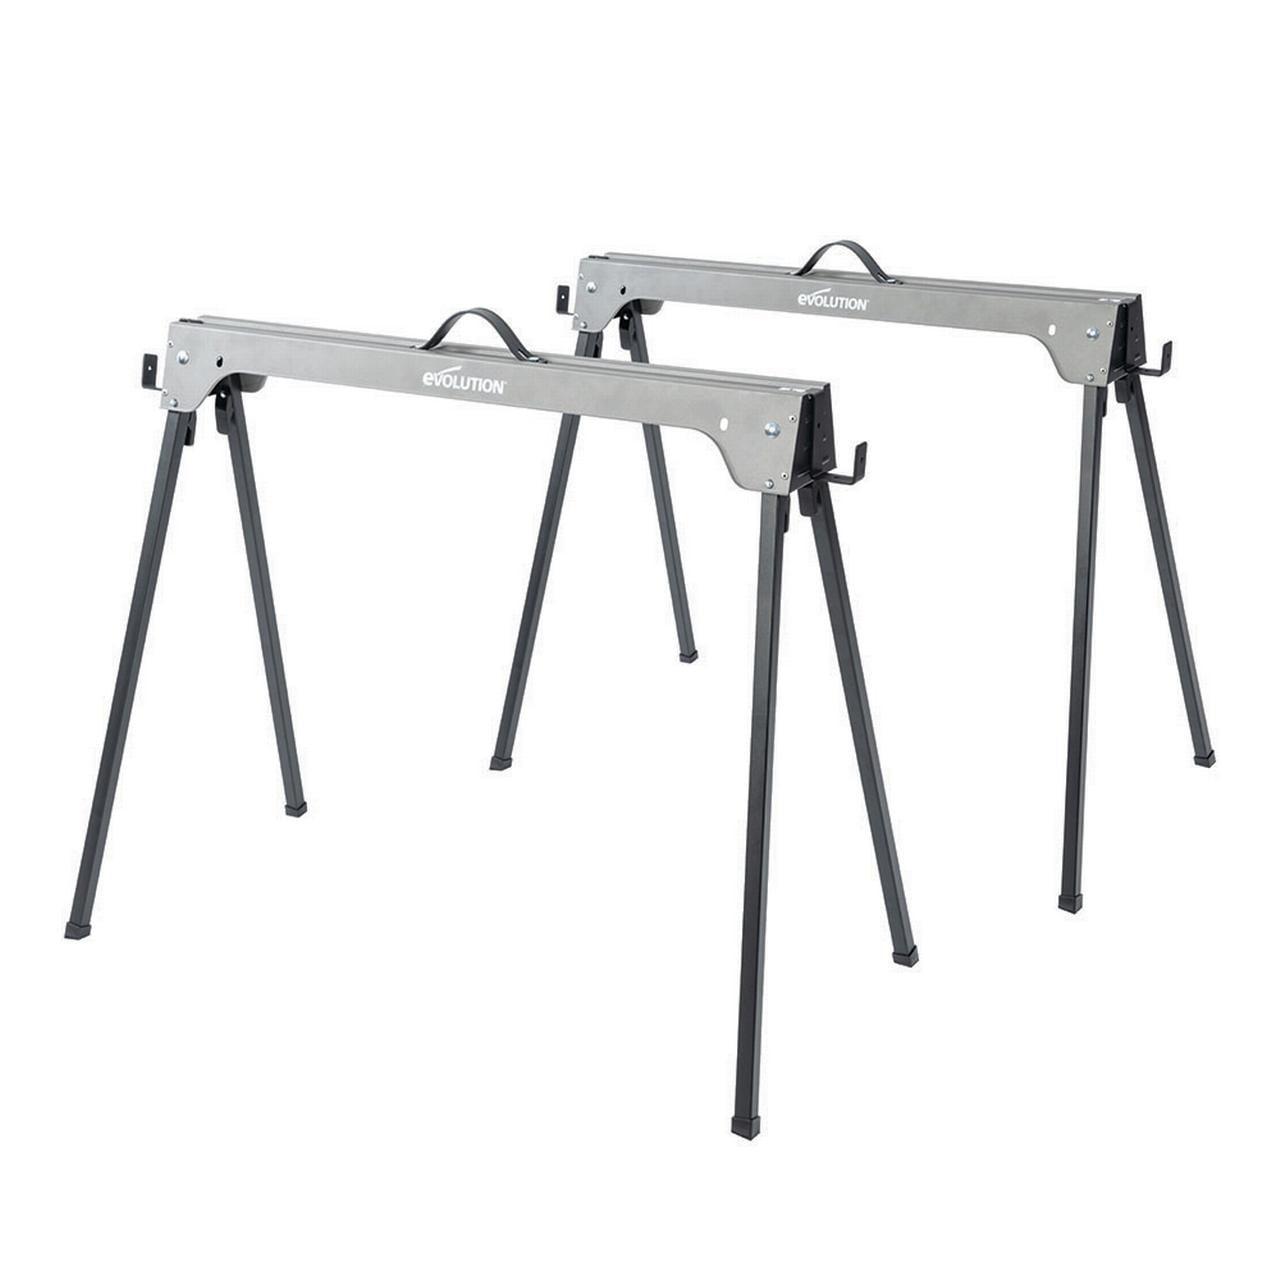 Details about   Sawhorse Saw Horse Folding 29 Inch Metal Work Heavy Duty Steel 2 Pack 